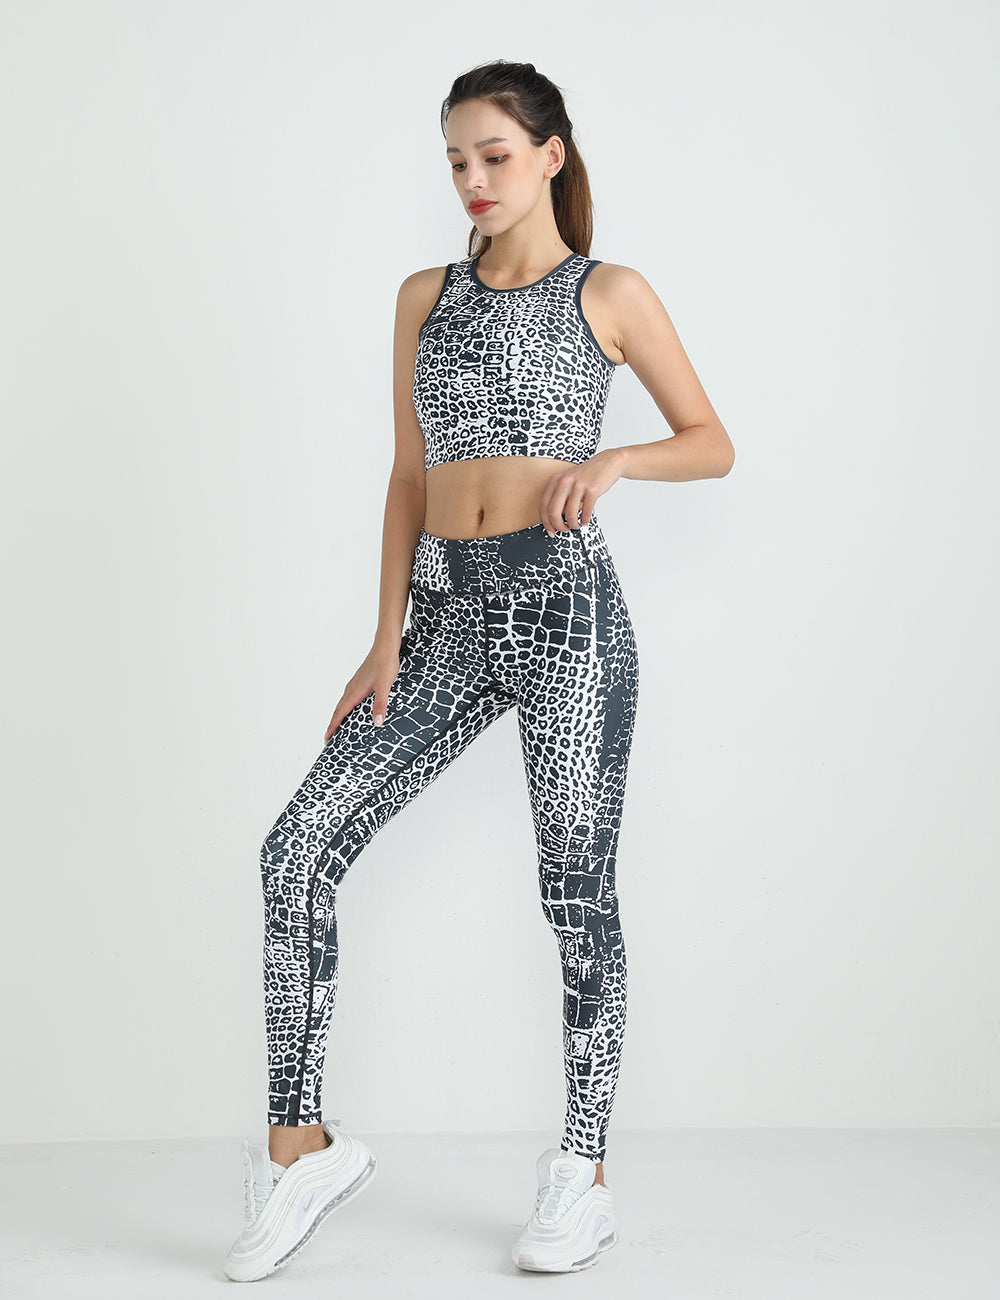 Neenca Workout For Women 2 Piece Sets